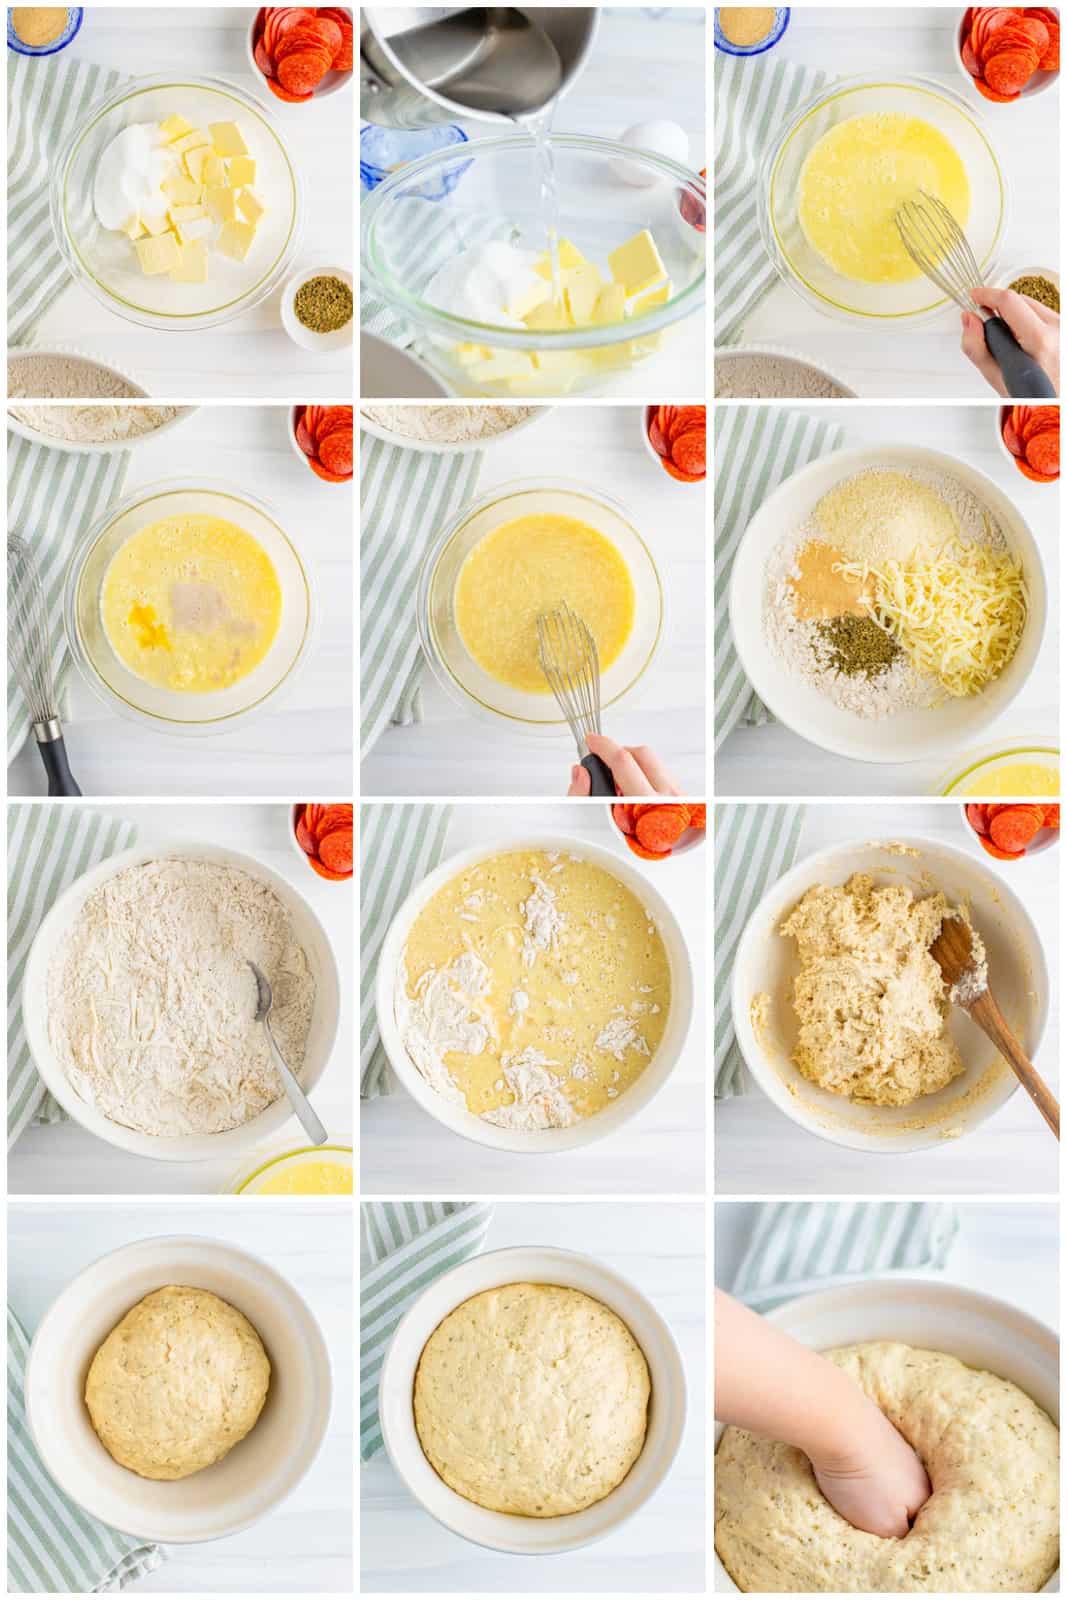 Step by step photos on how to make dough for Pizza Rolls